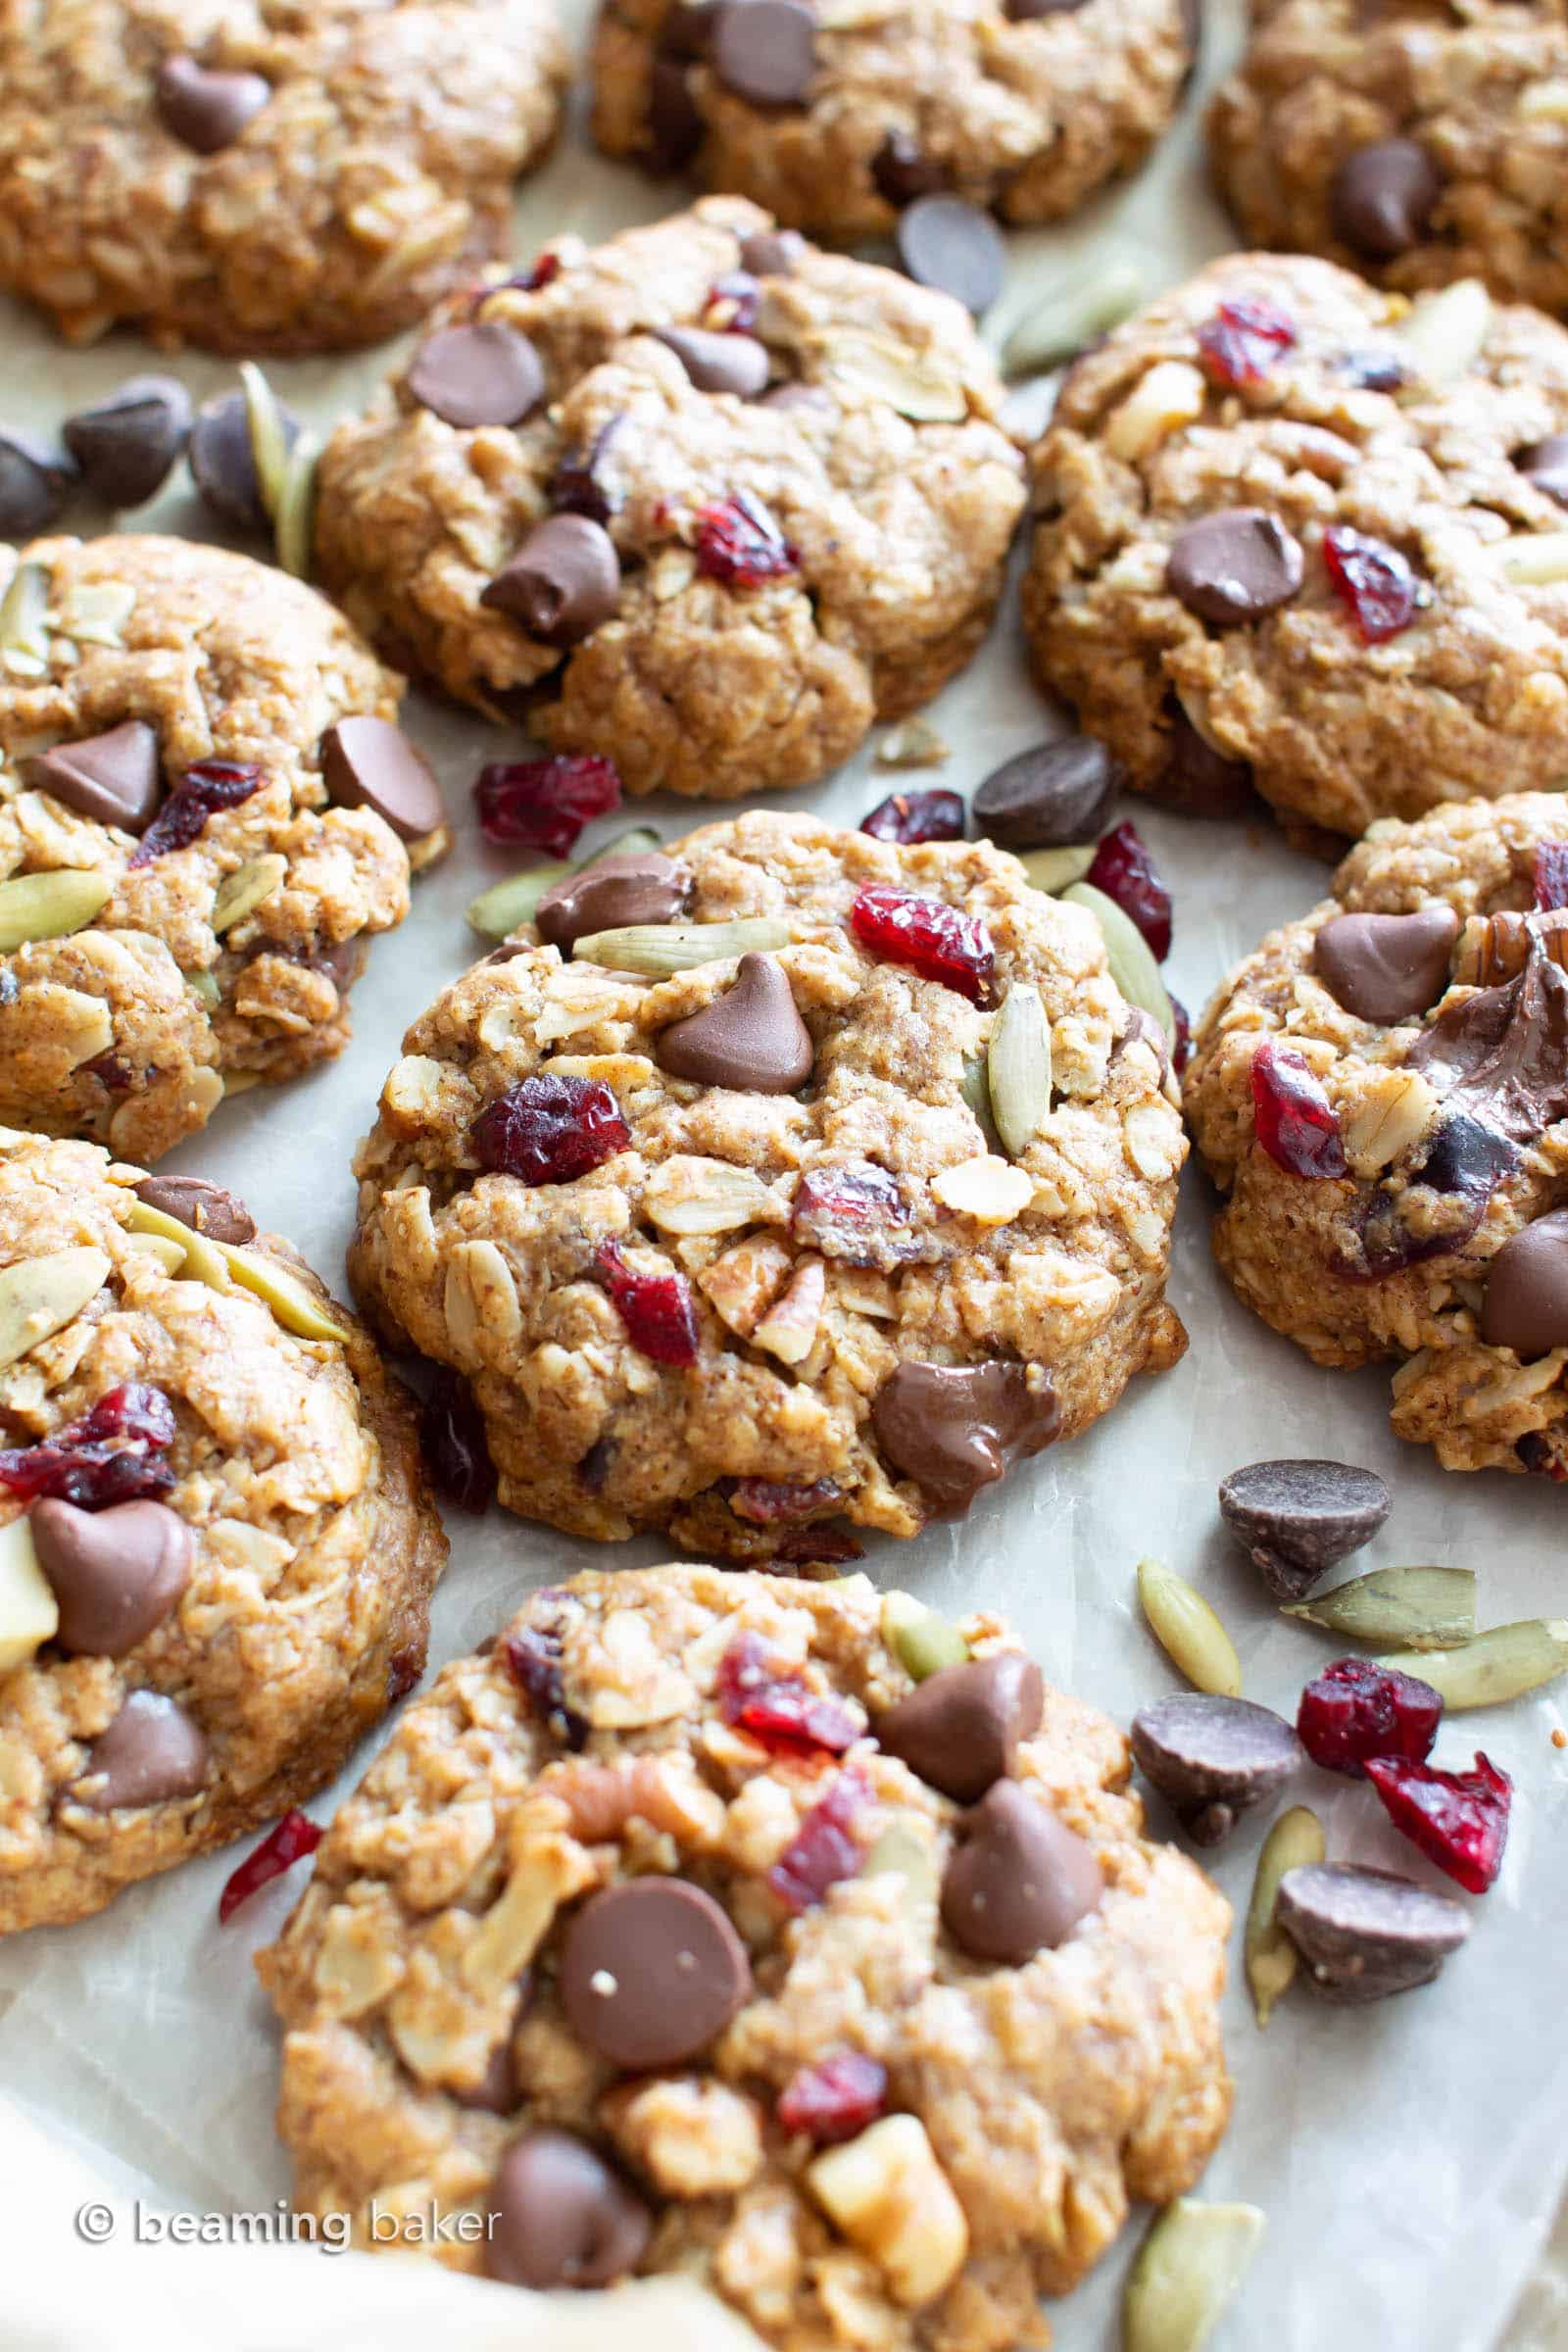 Easy Vegan Trail Mix Cookies Recipe (V, GF): learn how to make chewy vegan trail mix cookies packed with healthy fruits, nuts & seeds! The perfect homemade snack to bring with you on-the-go. Gluten Free, Dairy-Free. #Snacks #Healthy #Cookies #Vegan | Recipe at BeamingBaker.com